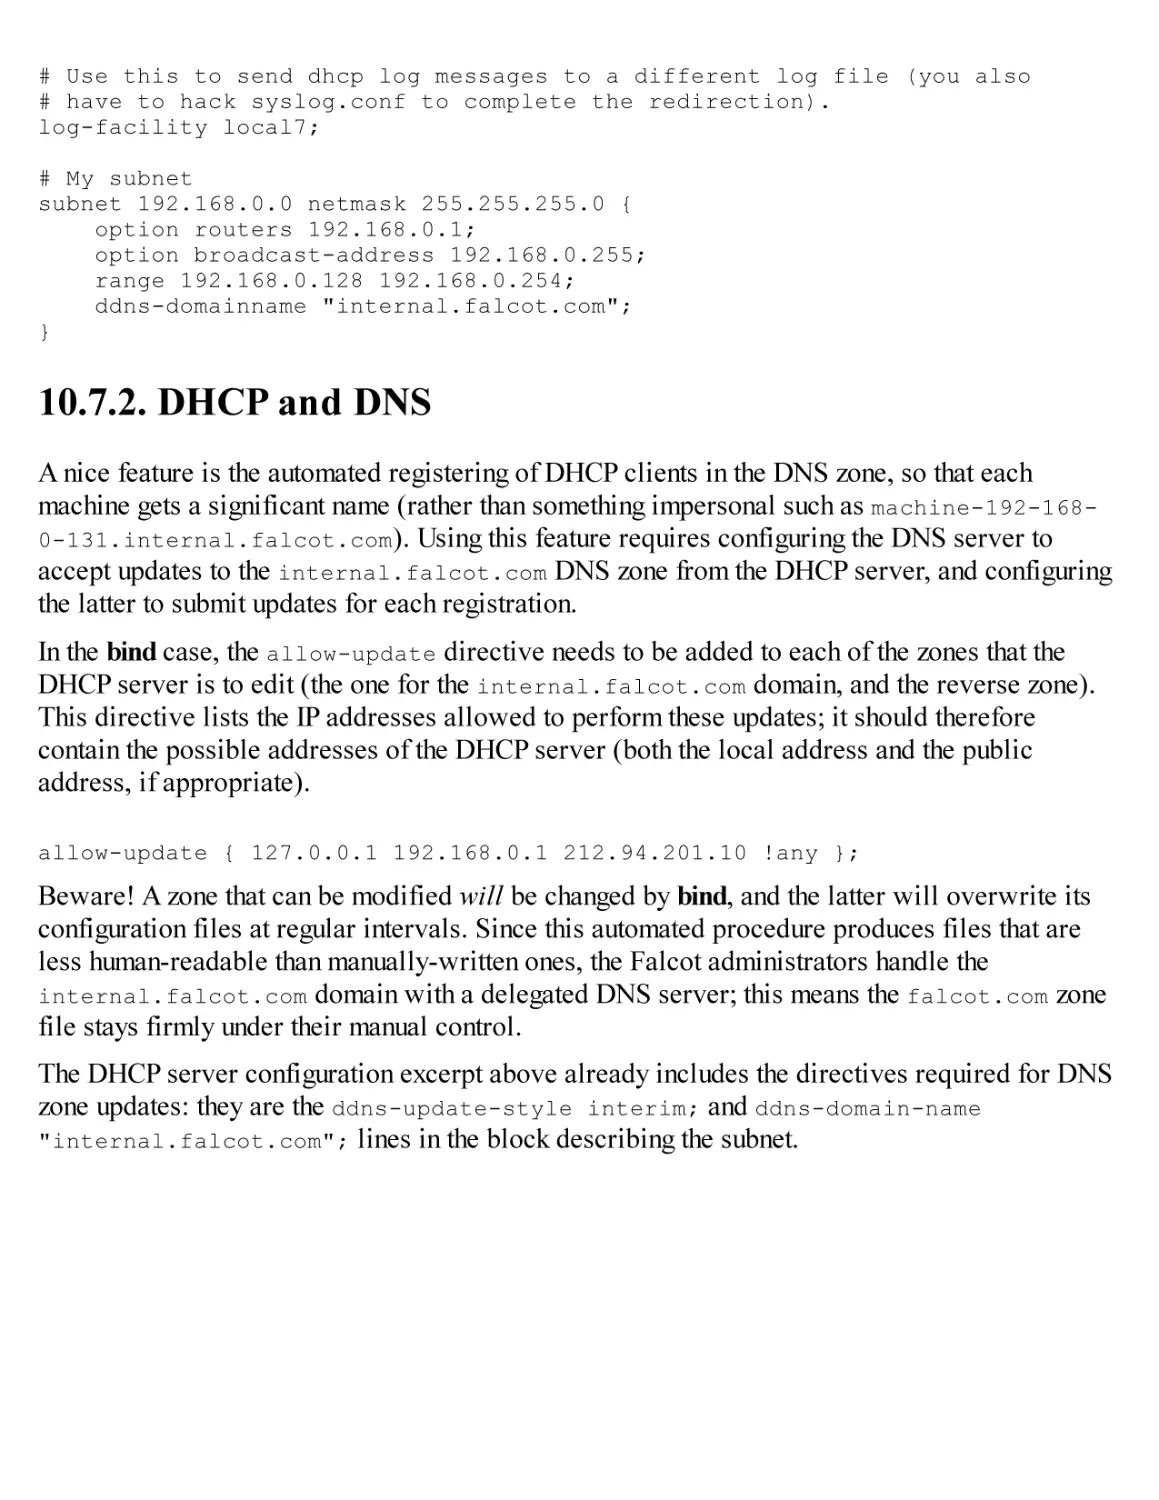 10.7.2. DHCP and DNS